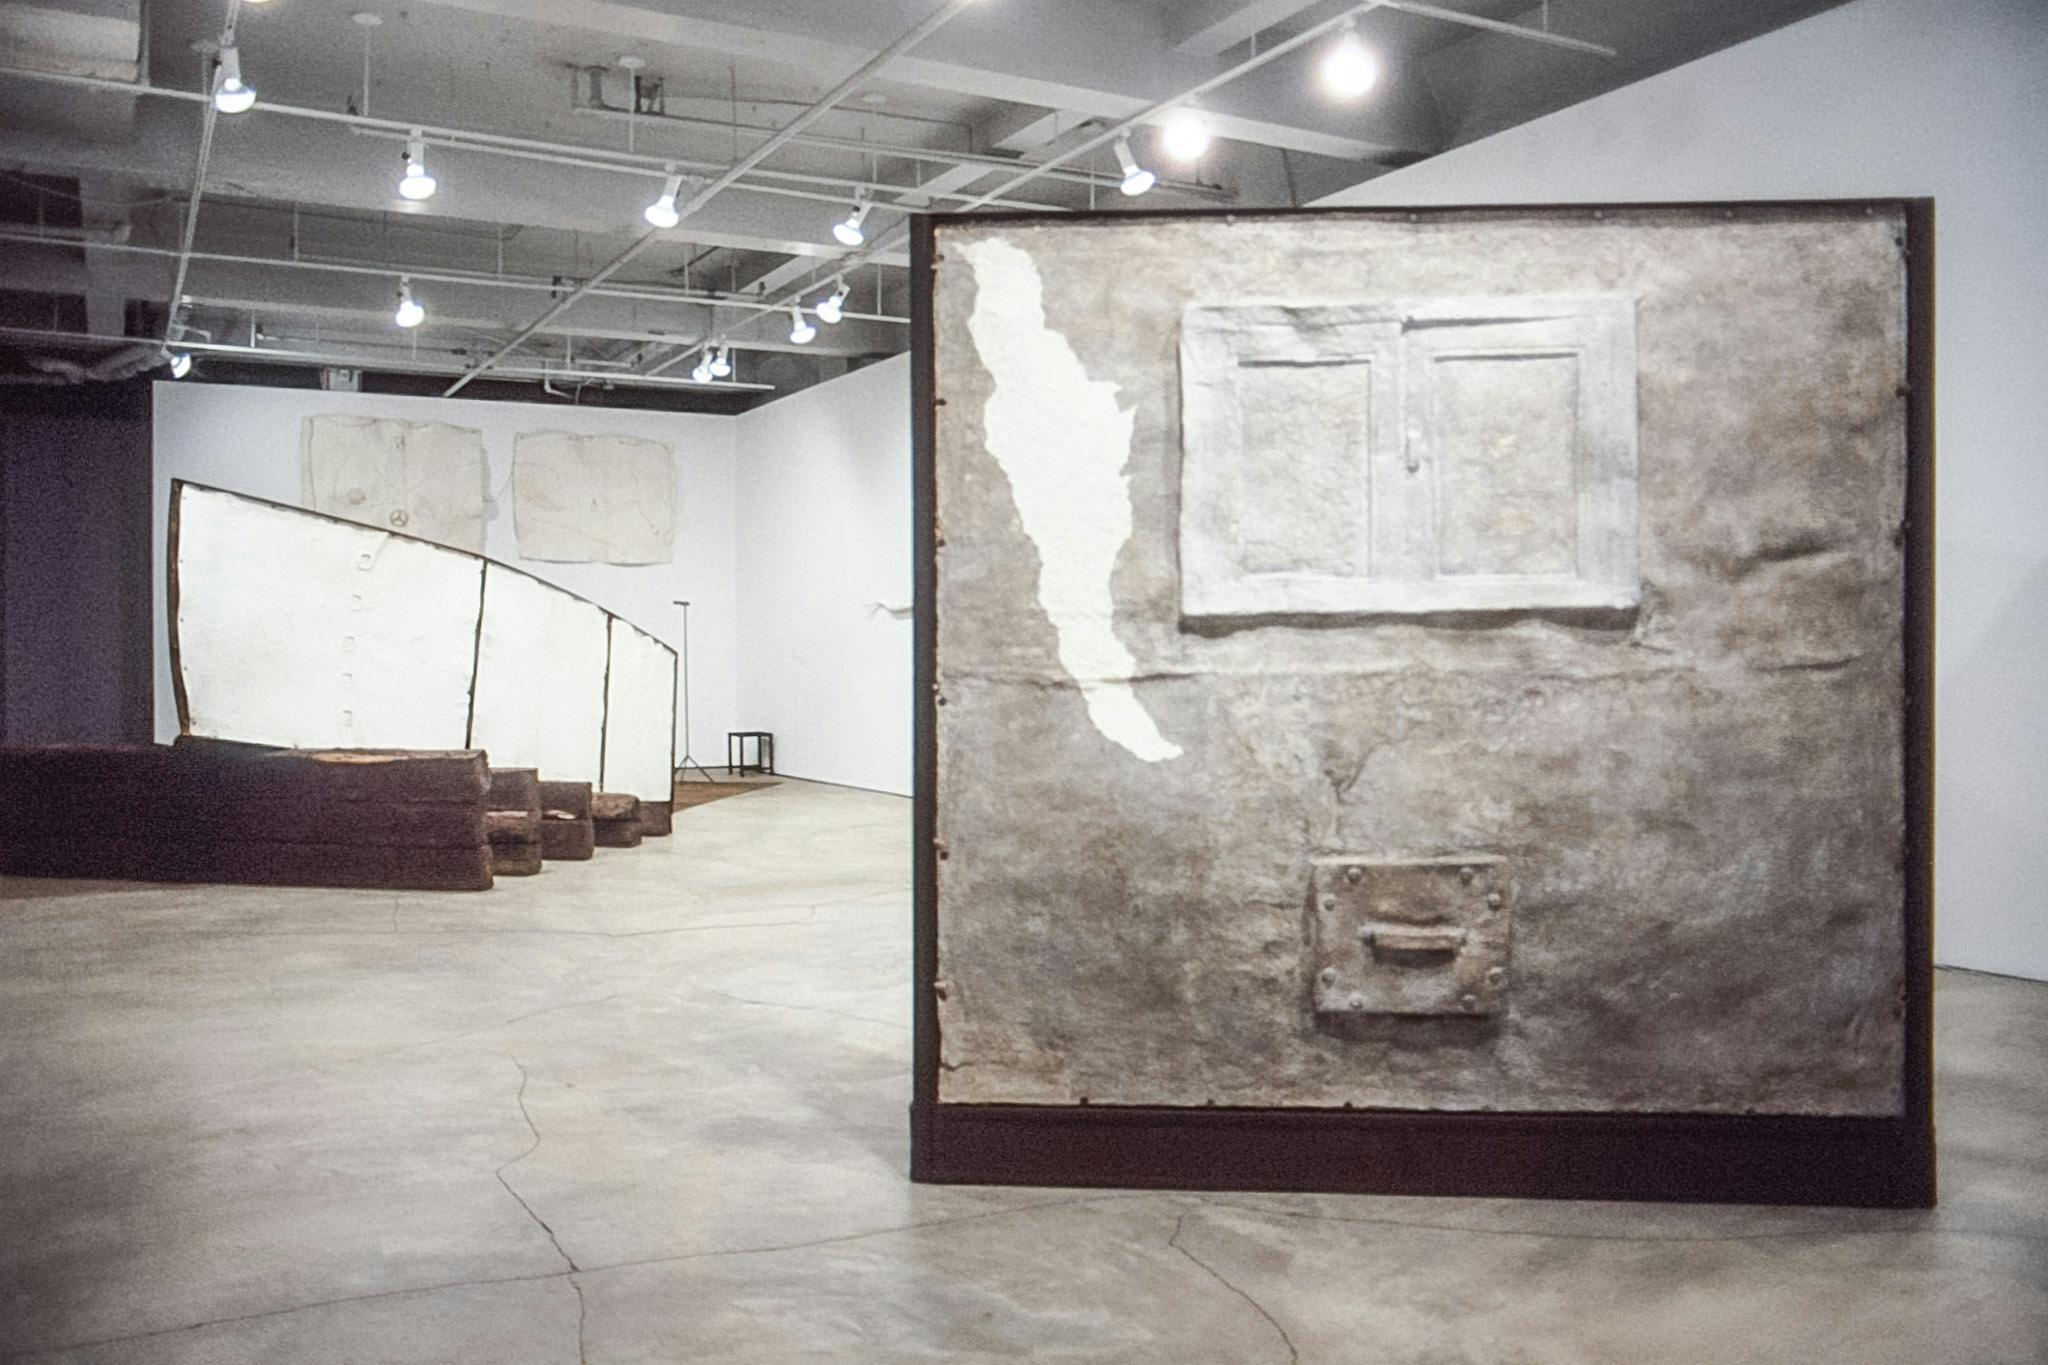 The installation view of the gallery shows three artworks. A pair of white sheets are installed on the back wall, foregrounded by a white boat head. A white cubical-shaped sculpture is in the front.  